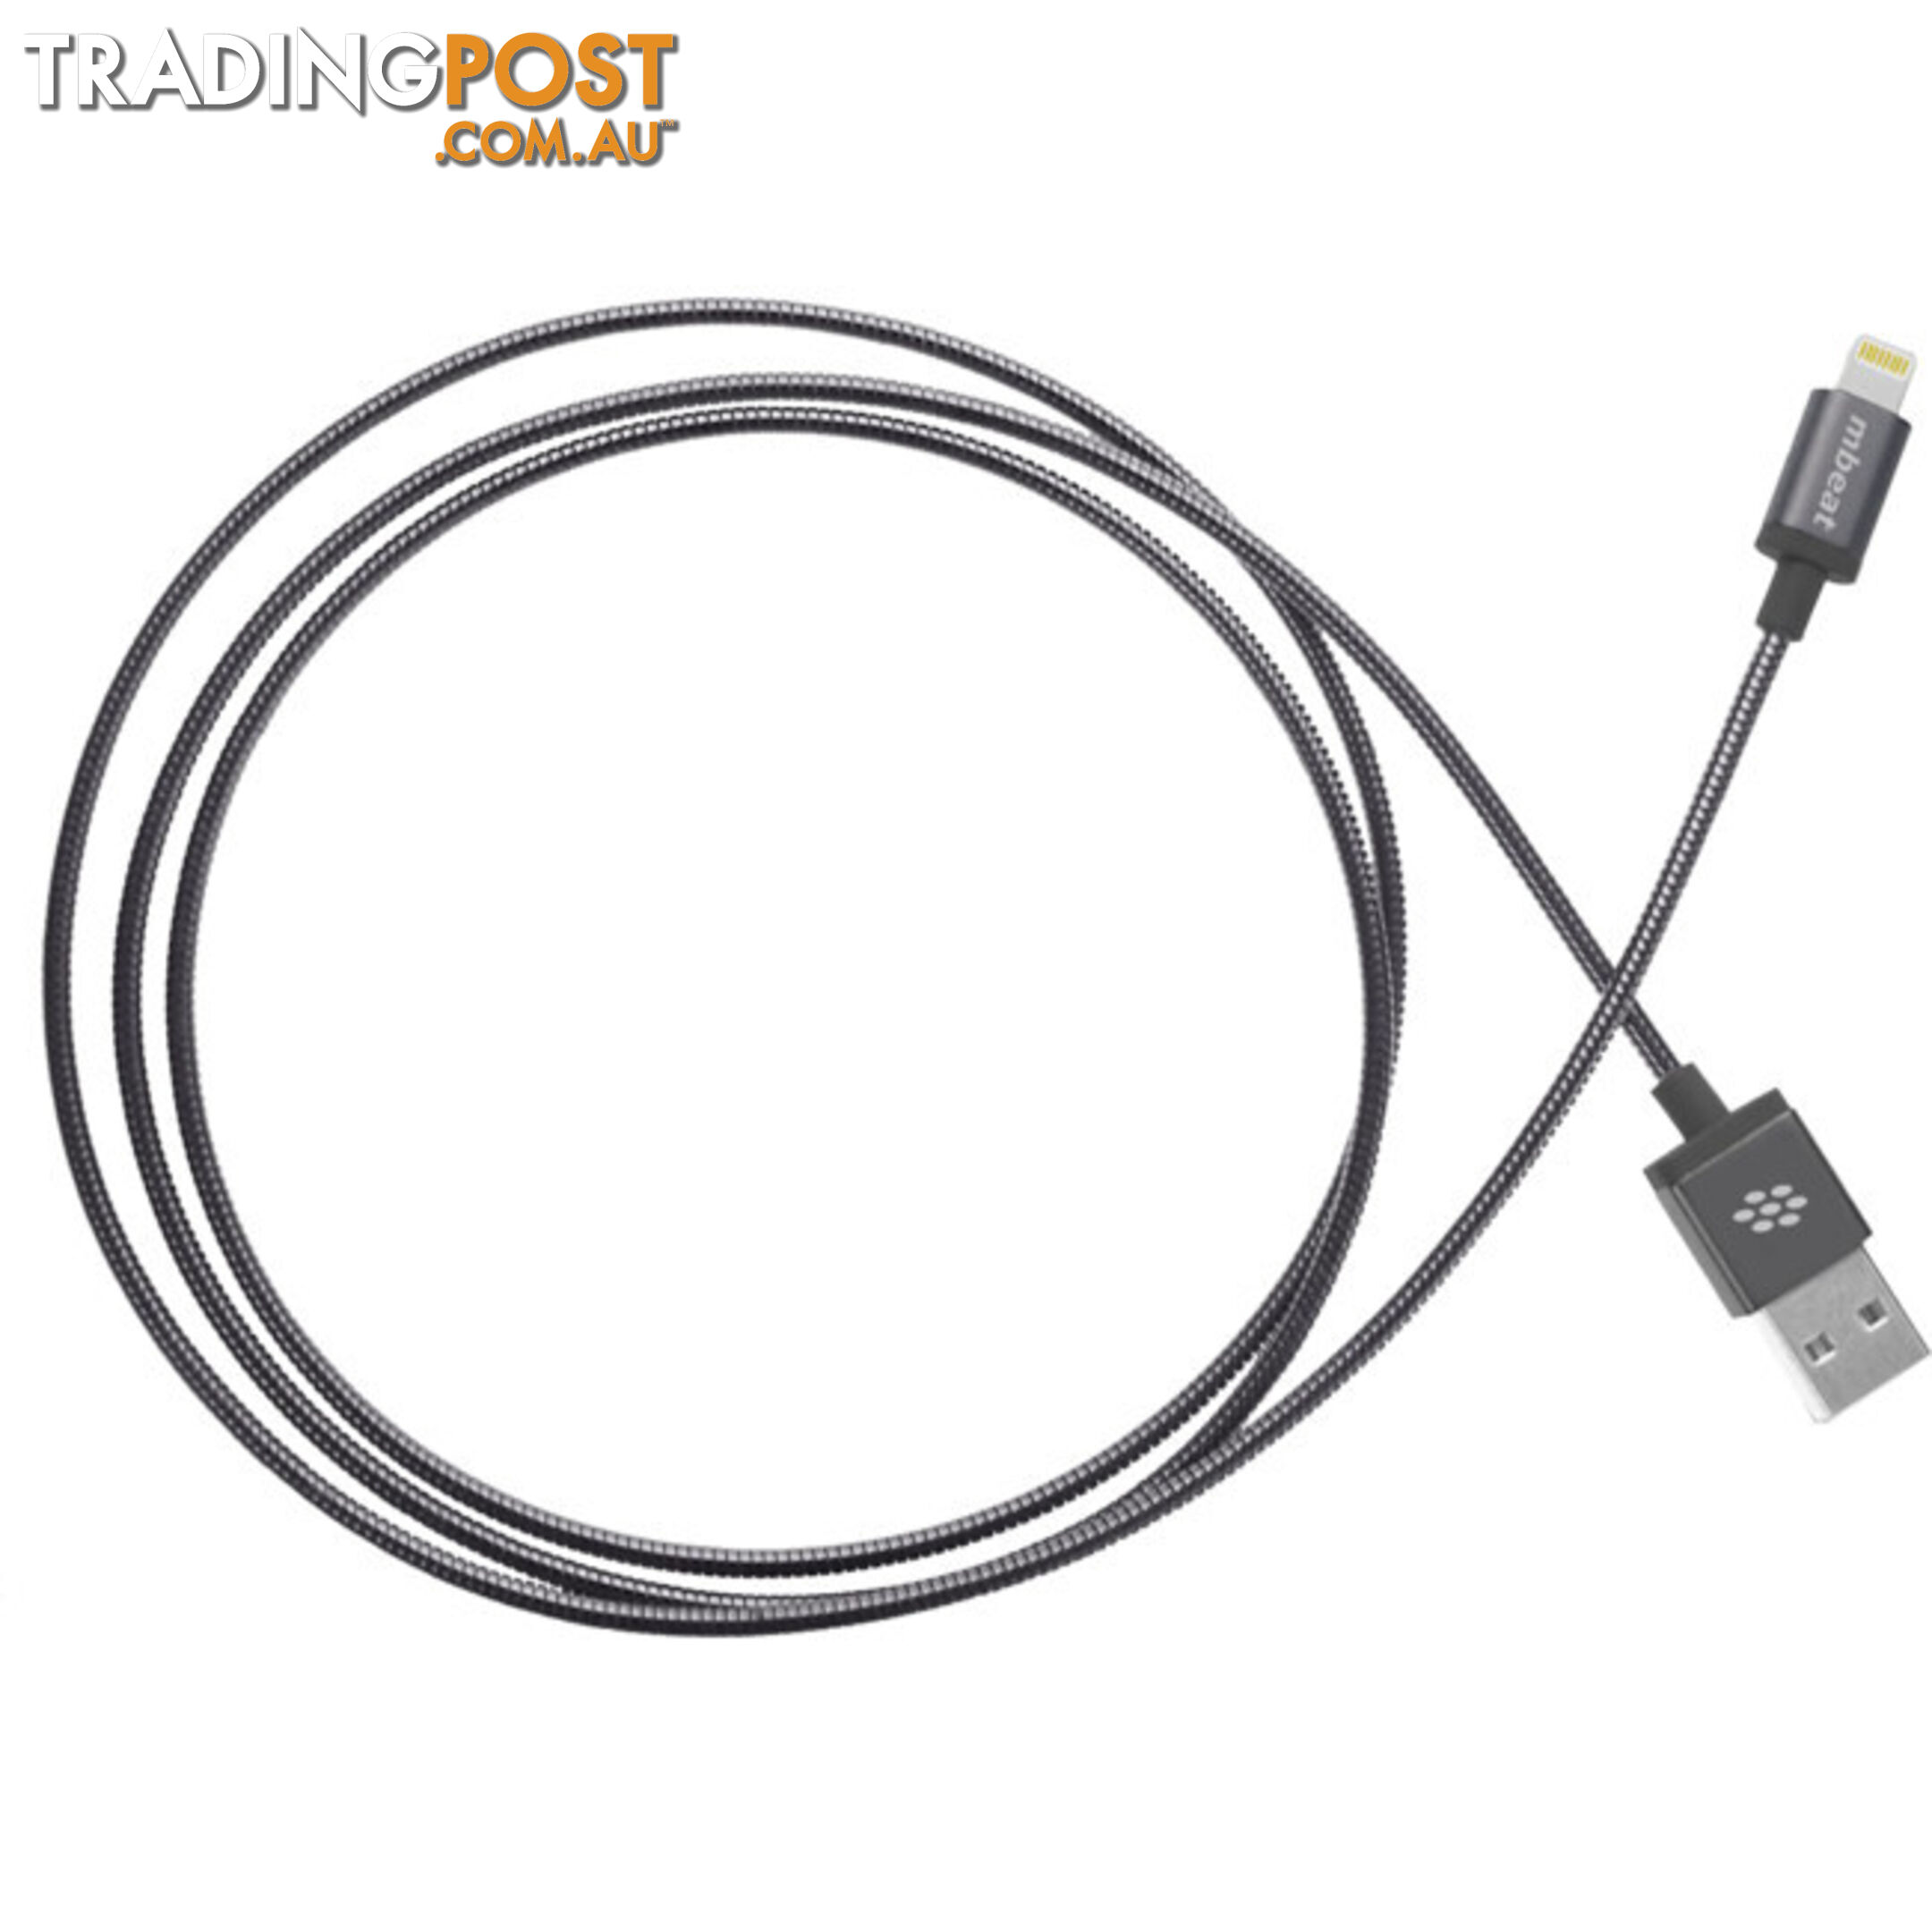 ICA-GRY 1.2M LIGHTNING CABLE GREY MFI TOUGHLINK